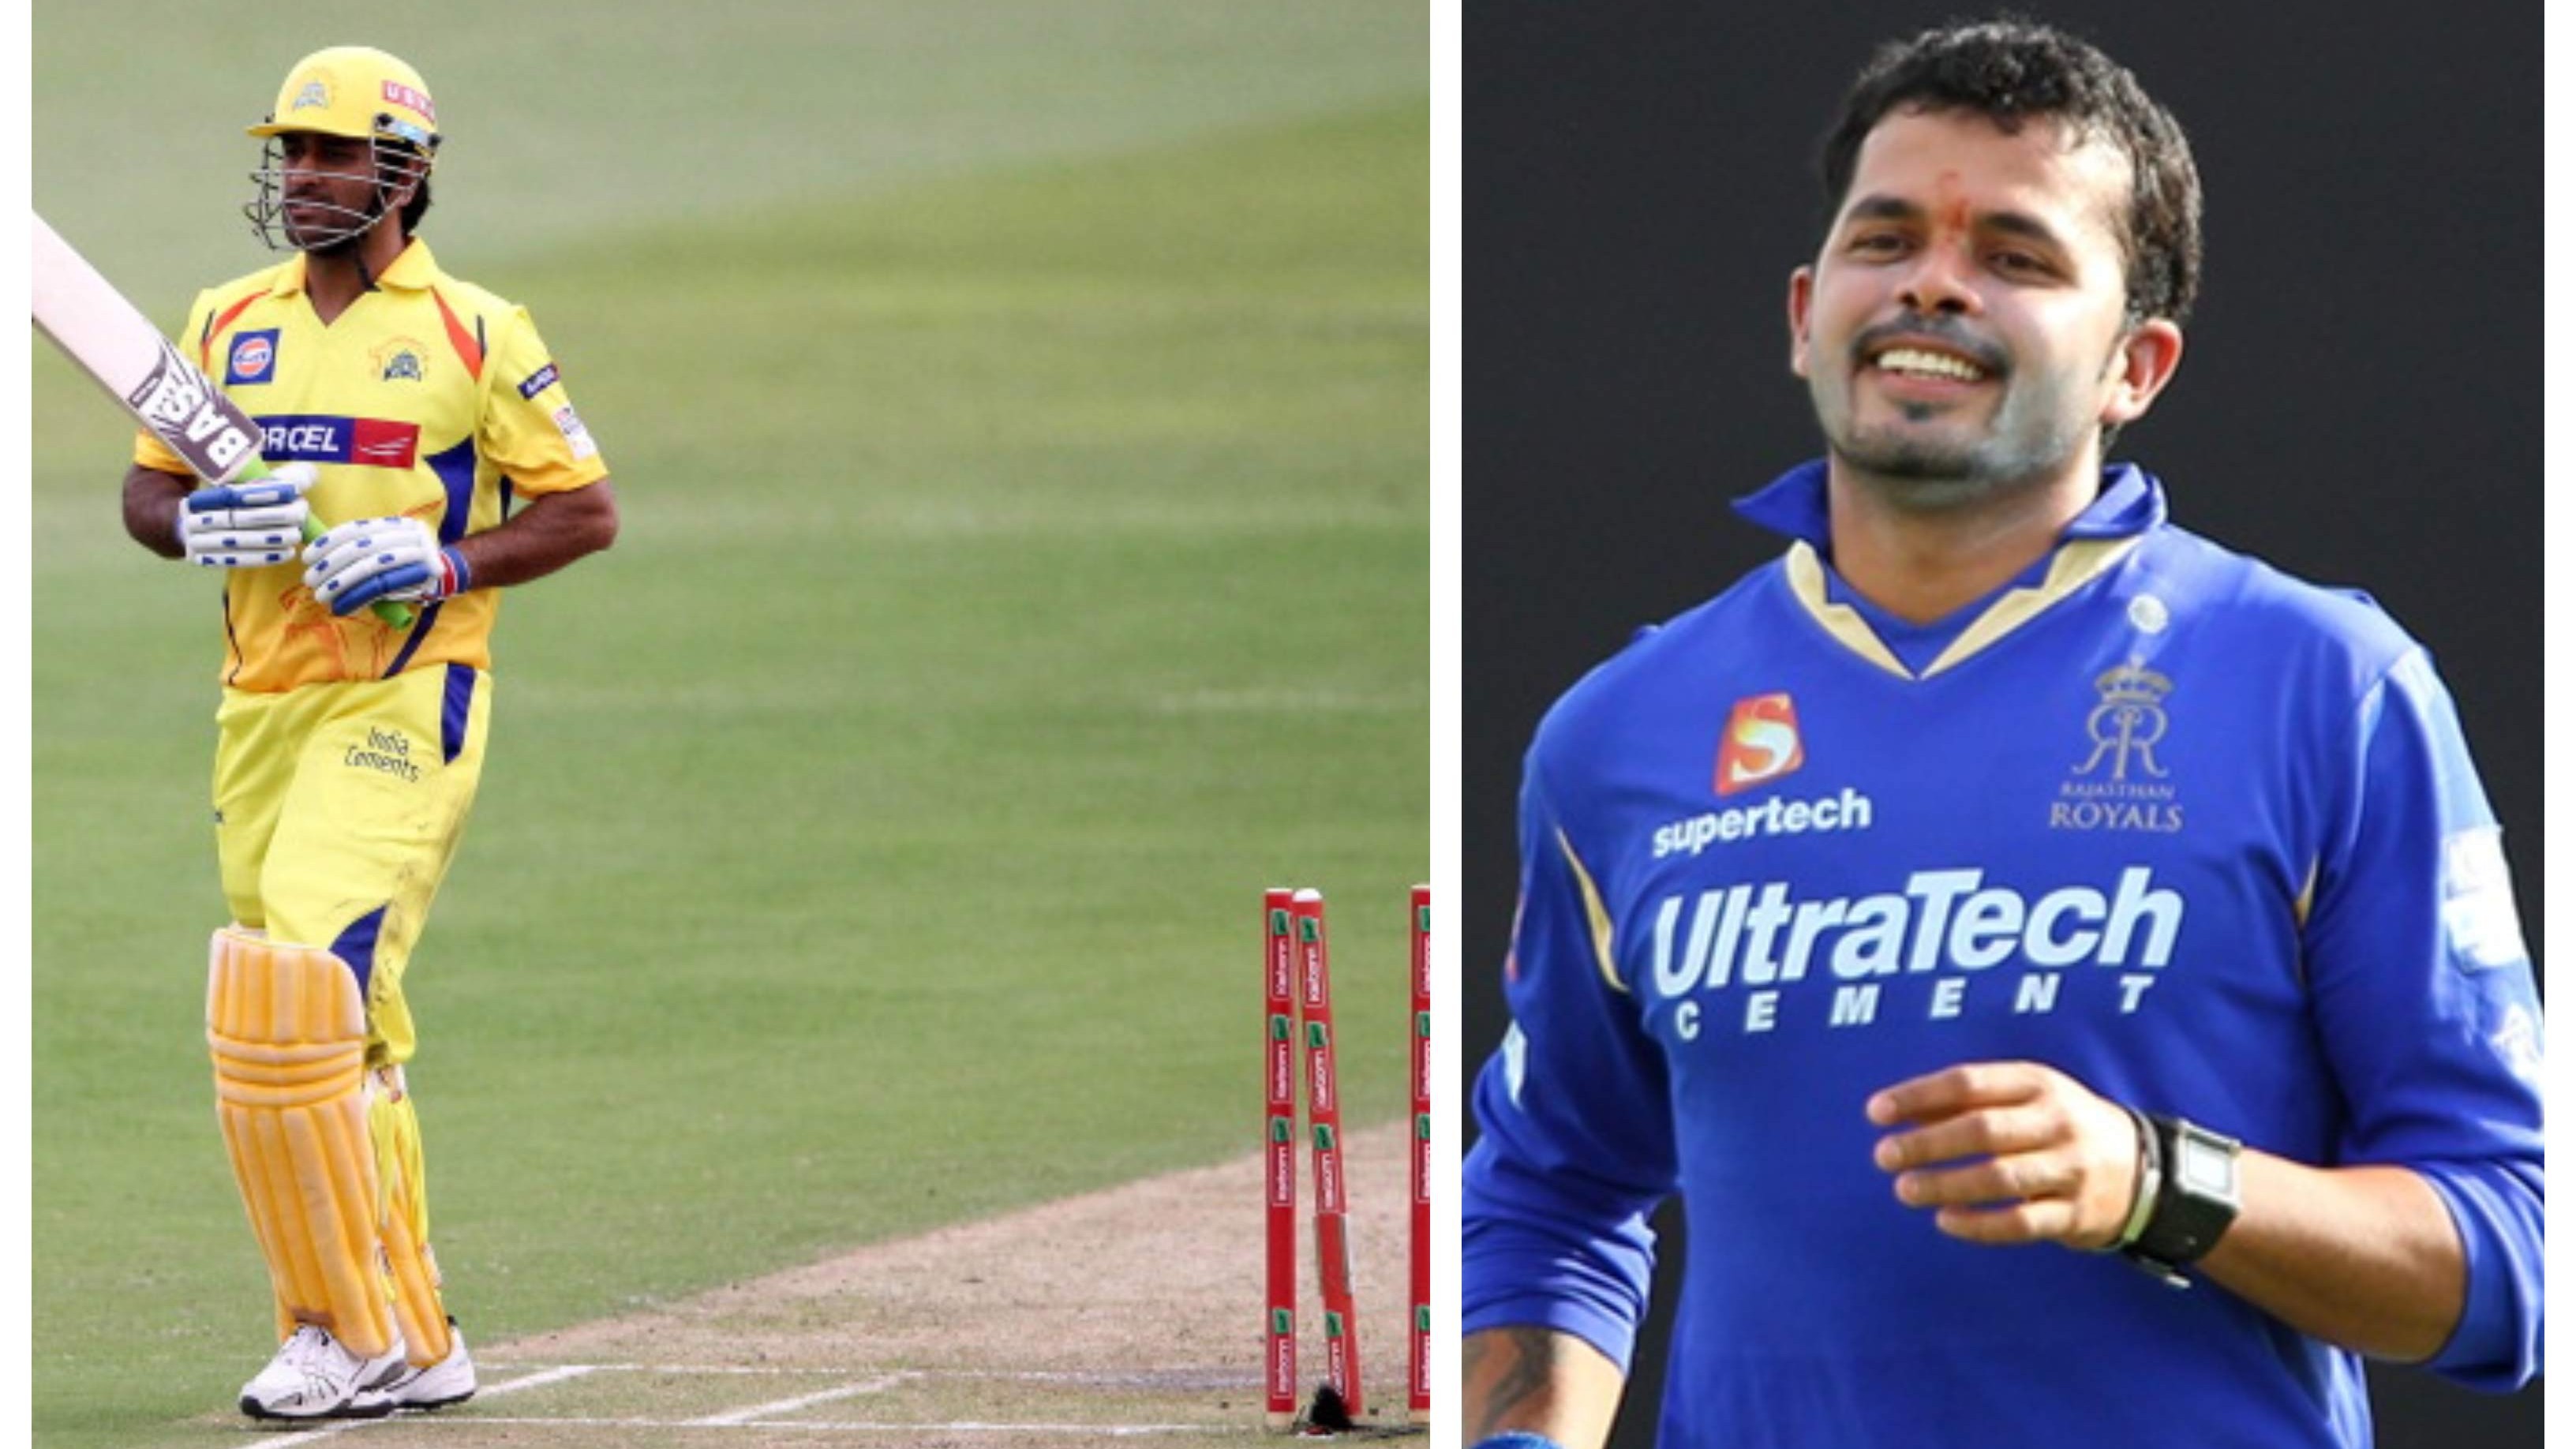 Sreesanth claims Rajasthan Royals never picked him for games against CSK after he took Dhoni’s wicket